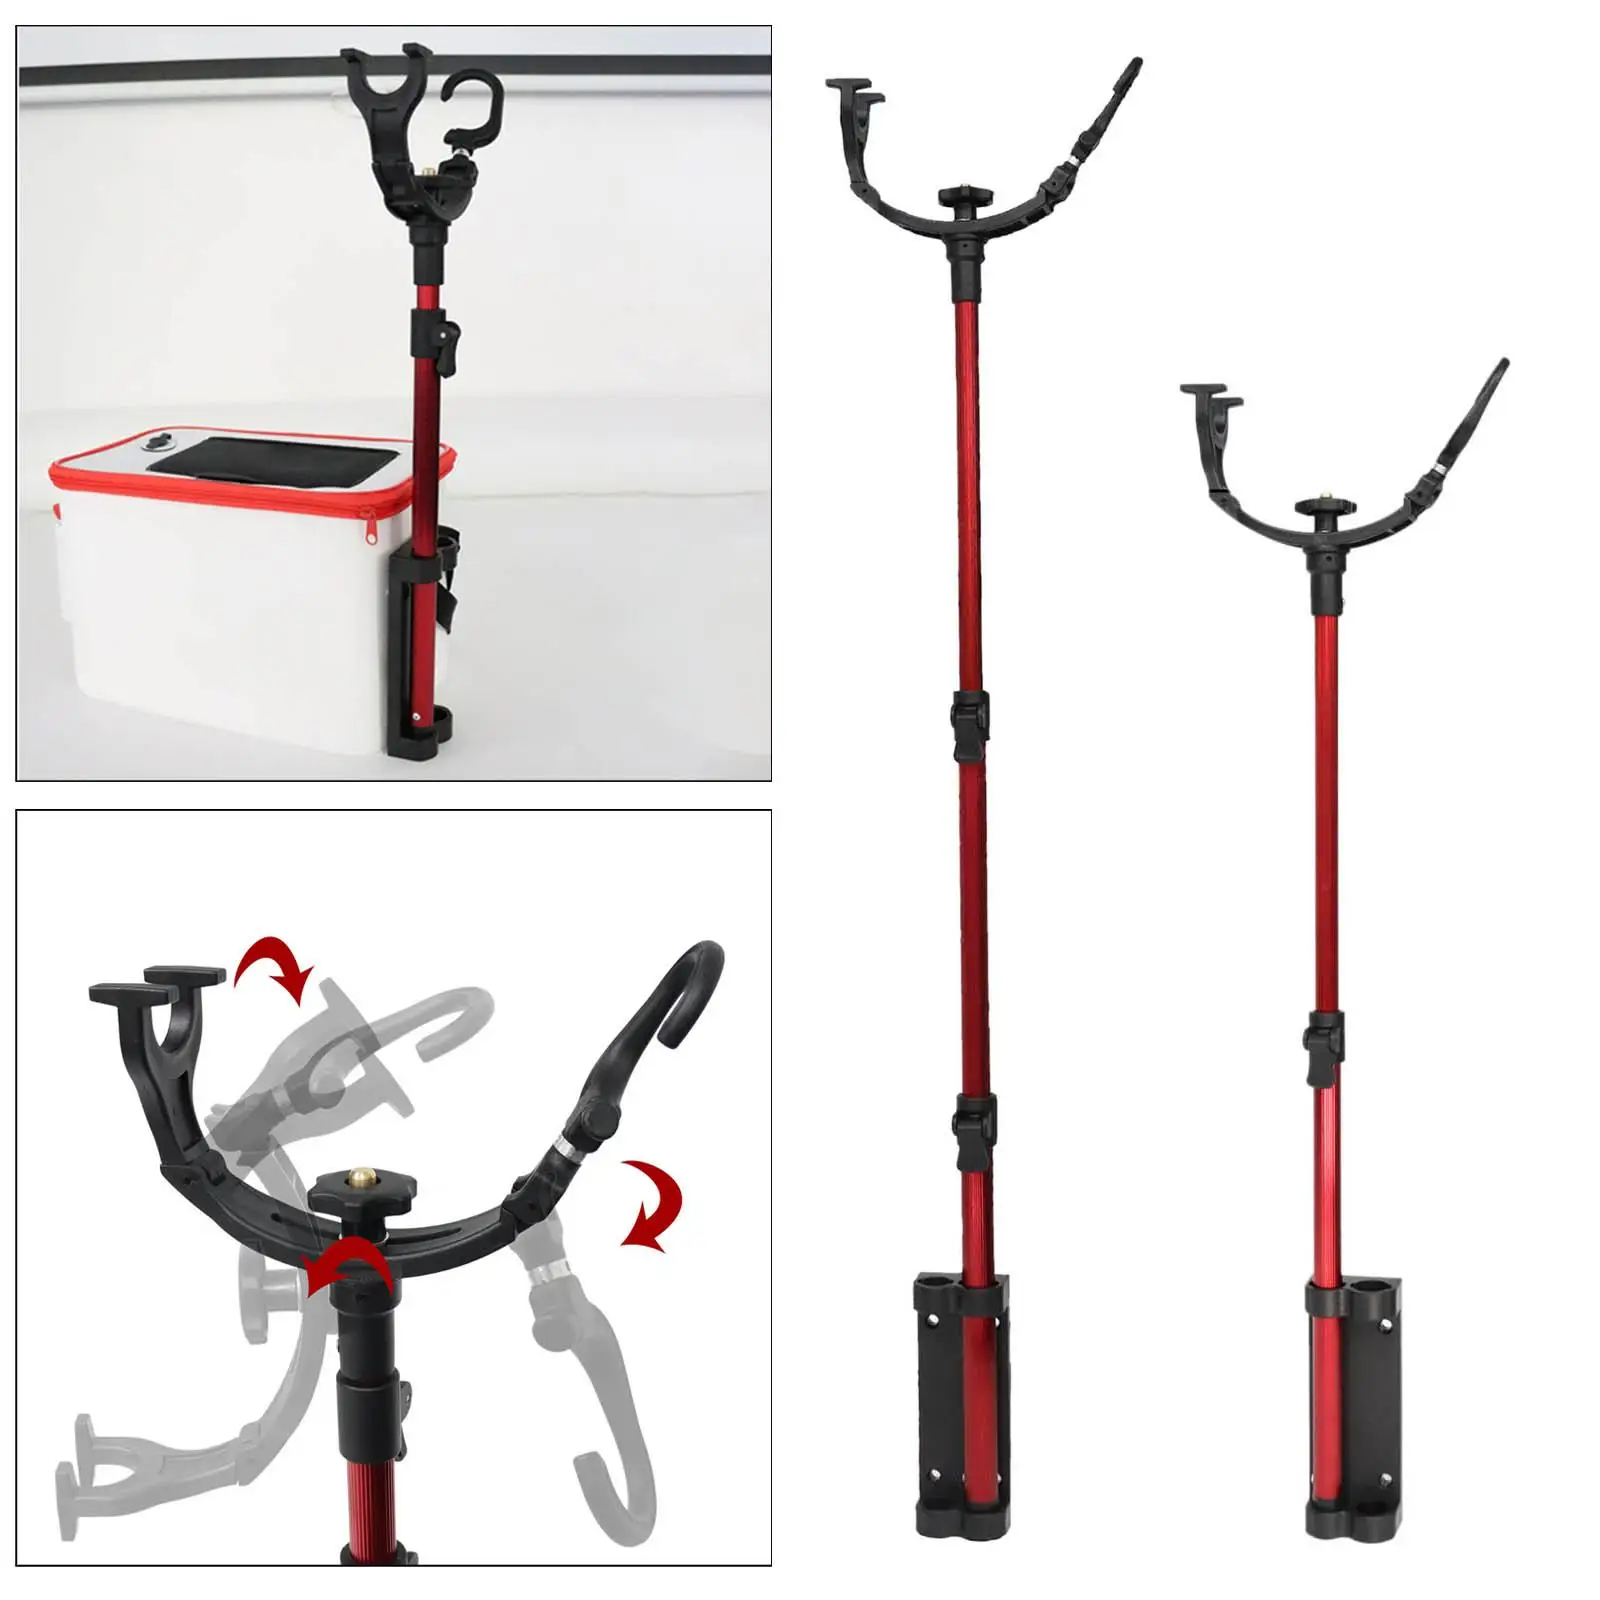 Multifunction Fishing Rod Holder Adjustable Durable with Ground Stake Fish Pole